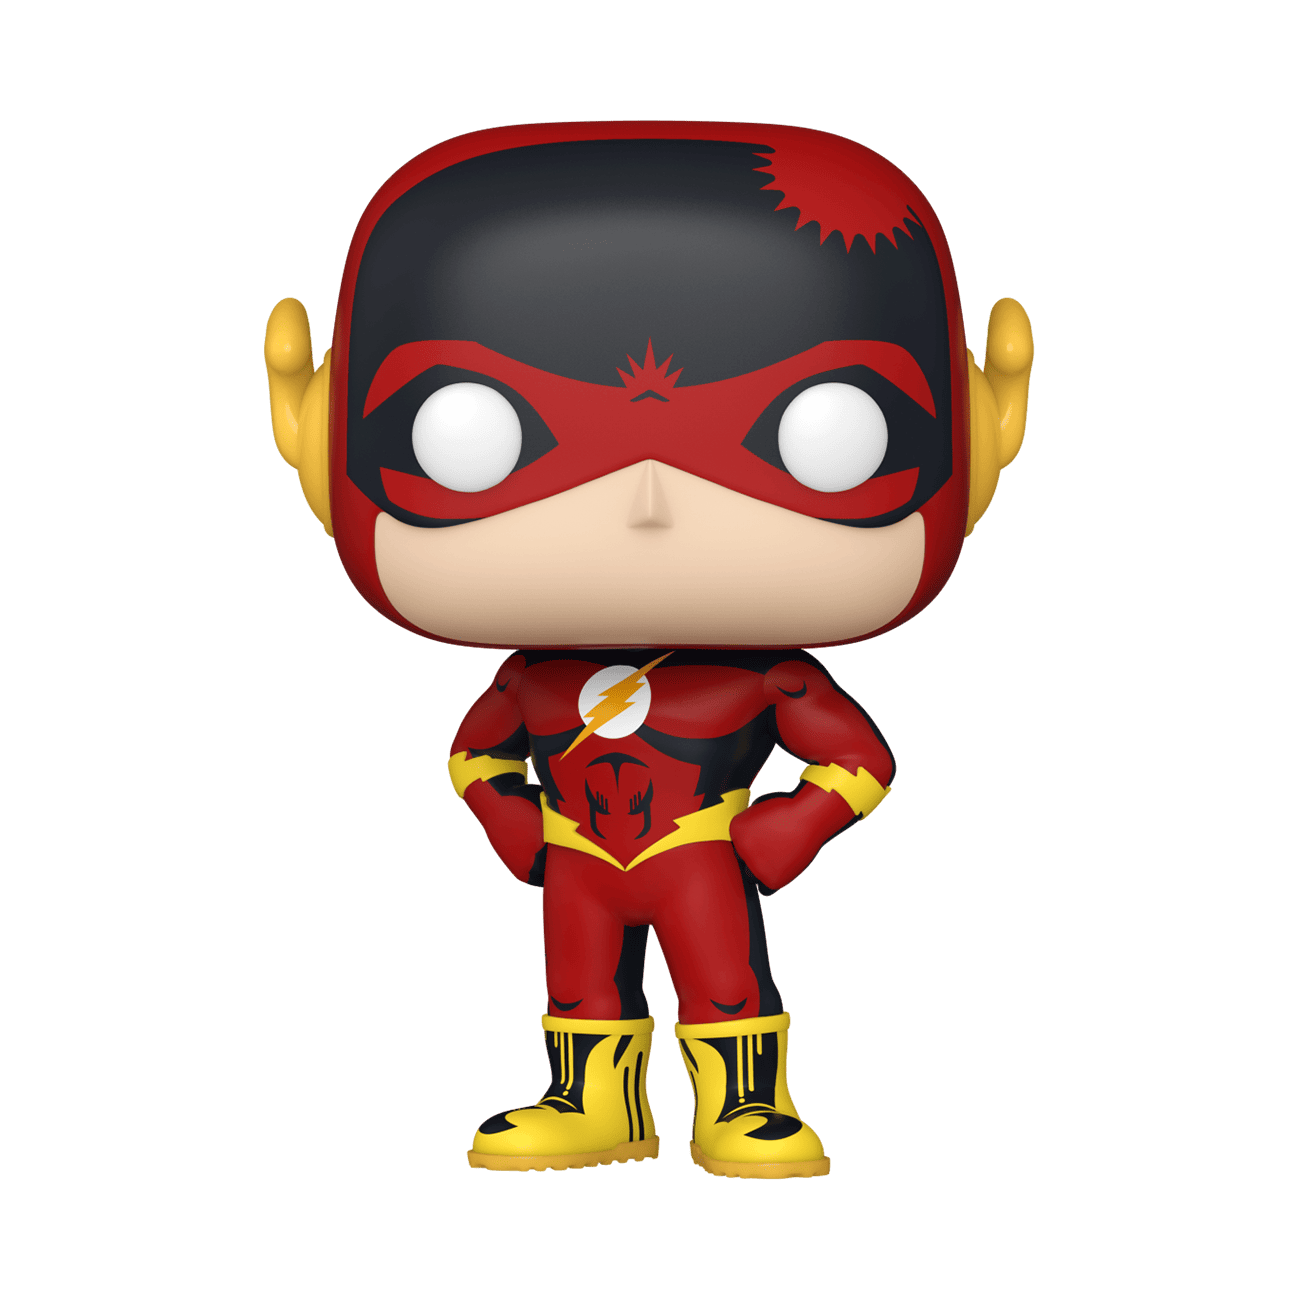 Buy Pop! The Flash at Funko.